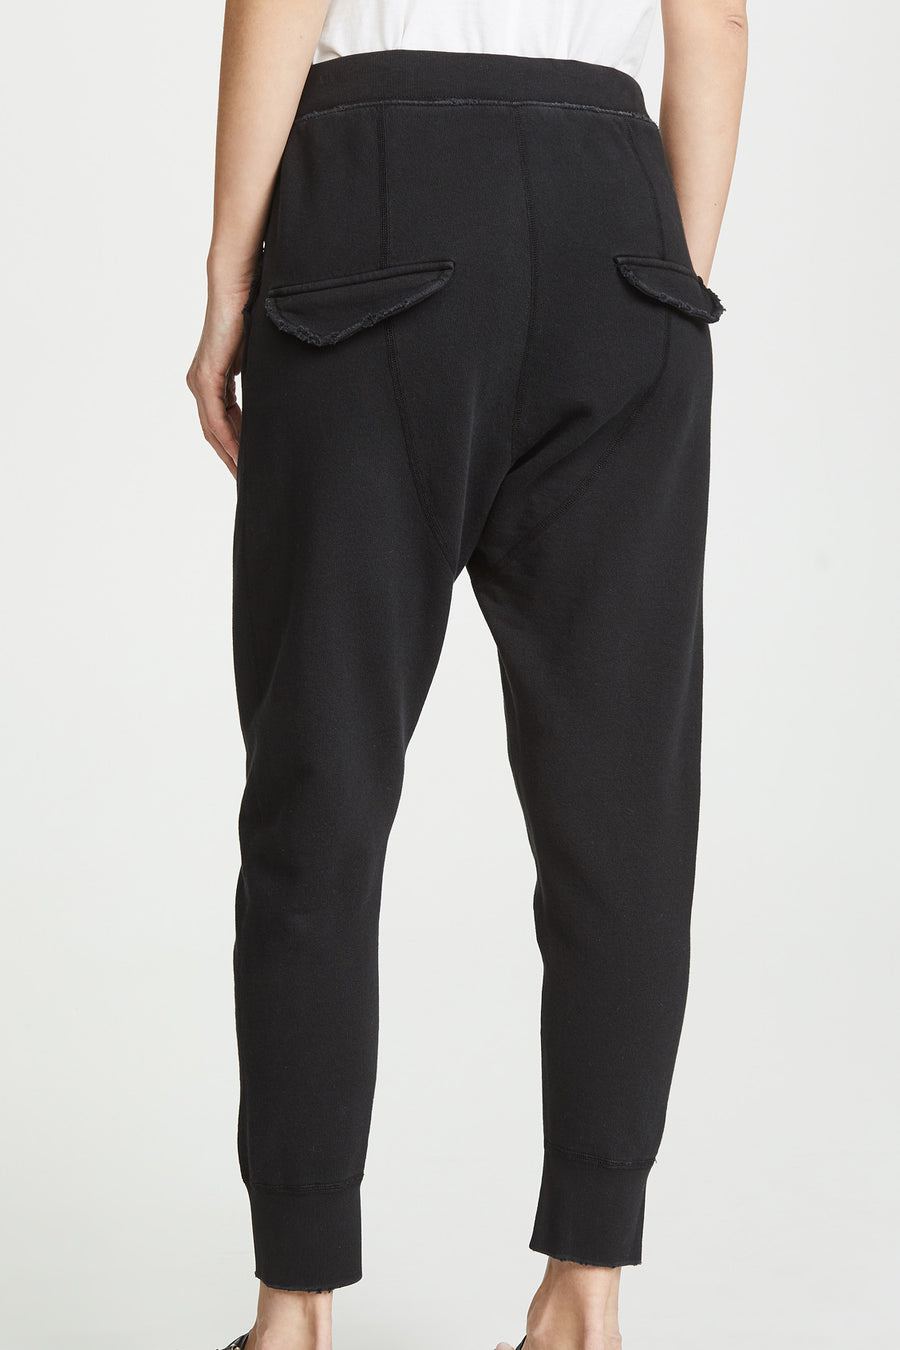 Known Supply Nolan Pant in Washed Black - Palm and Perkins